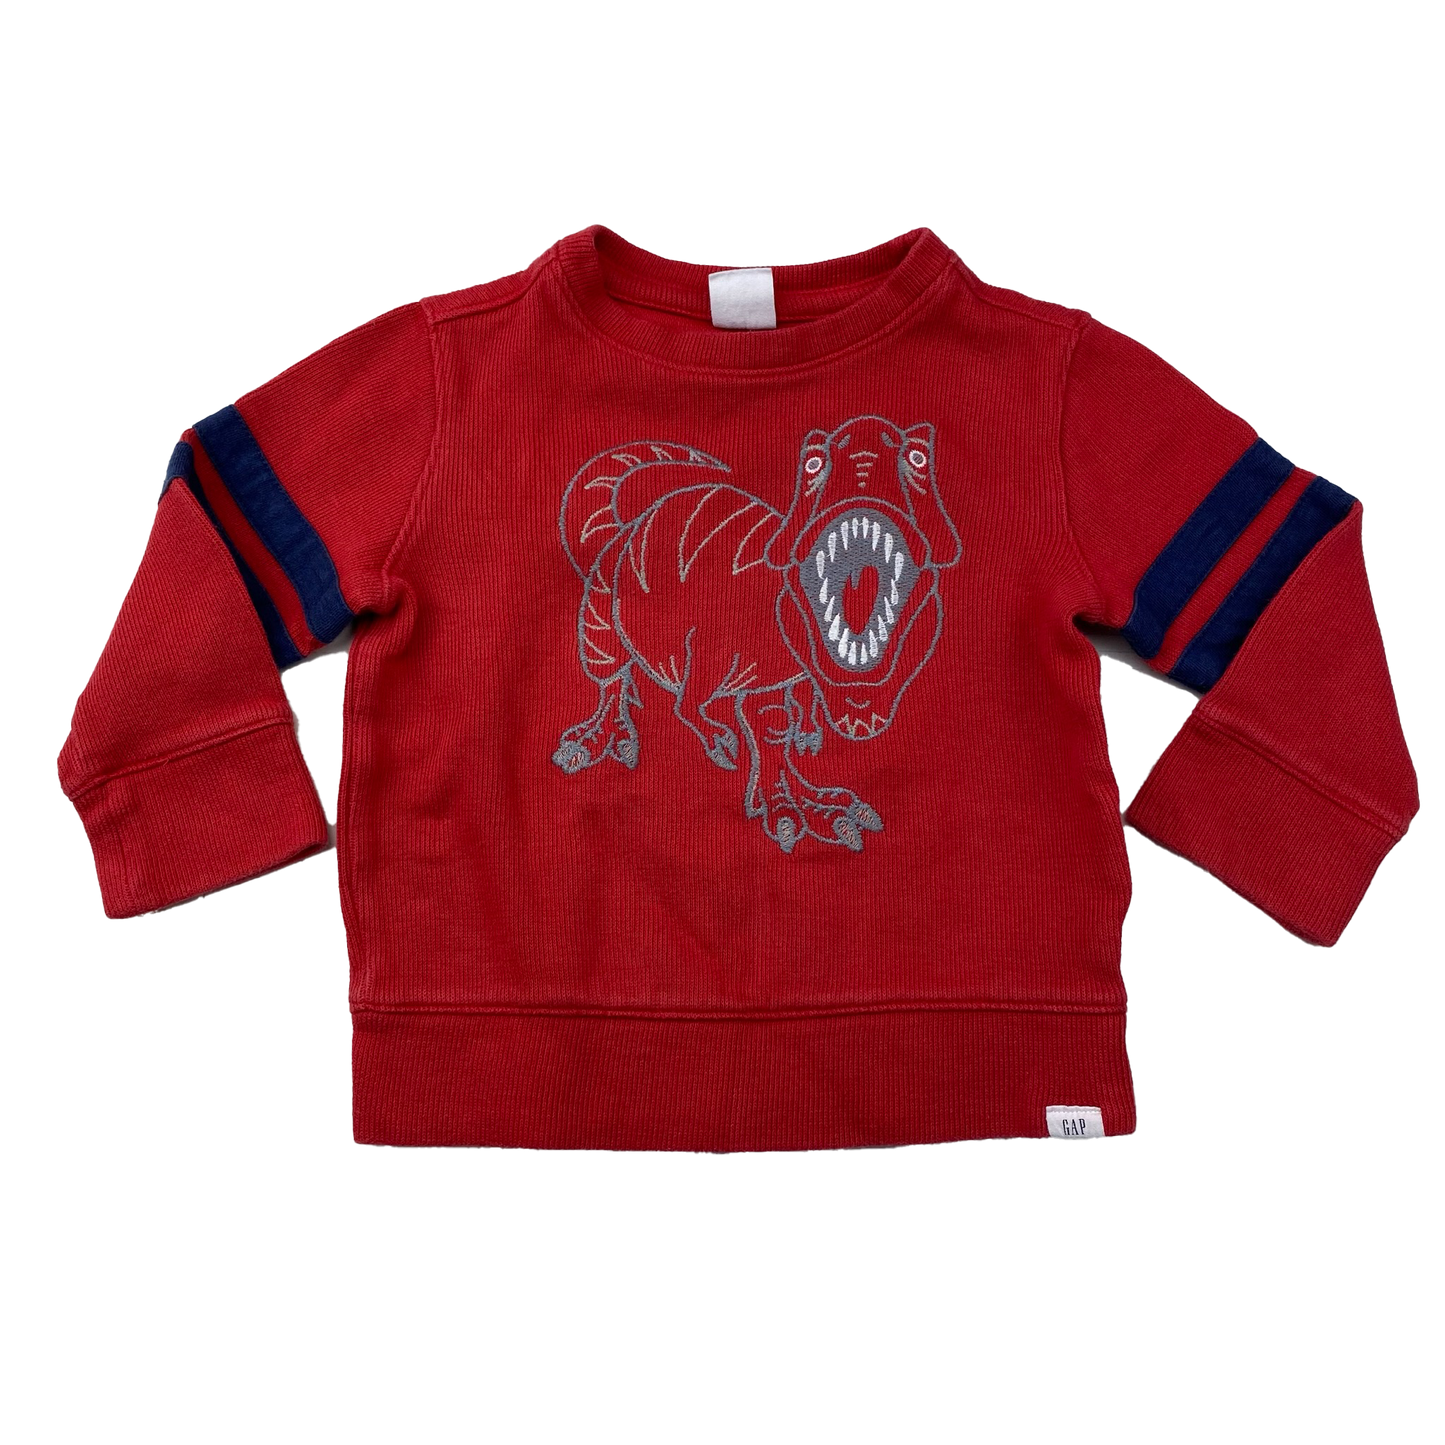 Gap Red Pull Over Sweater with Dinosaur 18-24M